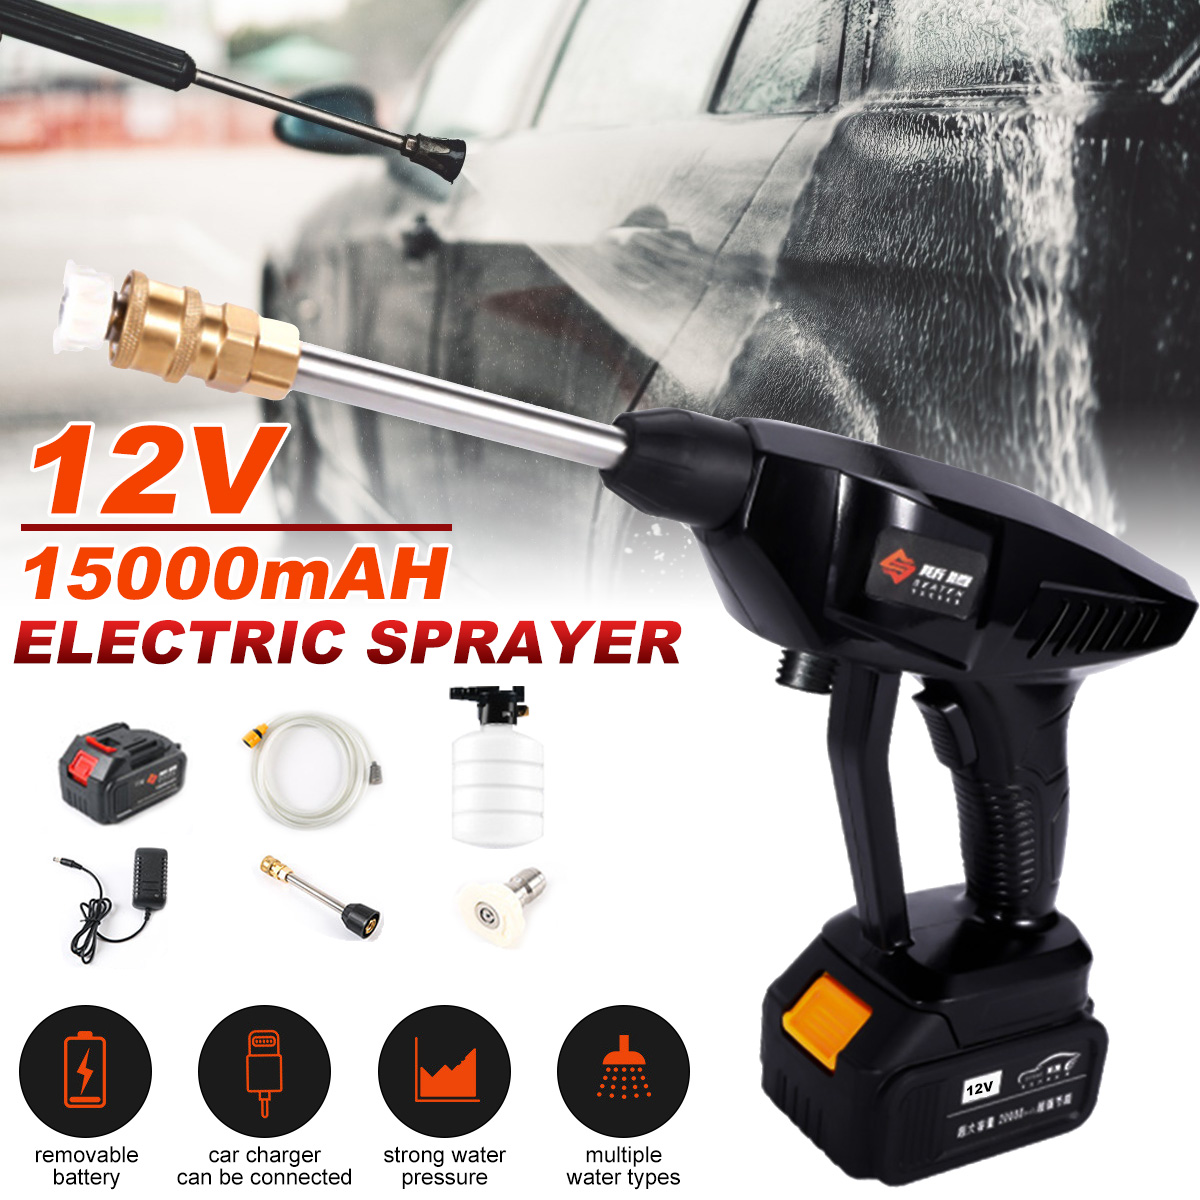 12V-15000mAh-Cordless-Electric-Pressure-Washer-Rechargeable-Car-Washing-Machine-Water-Spray-Guns-W-1-1830643-1